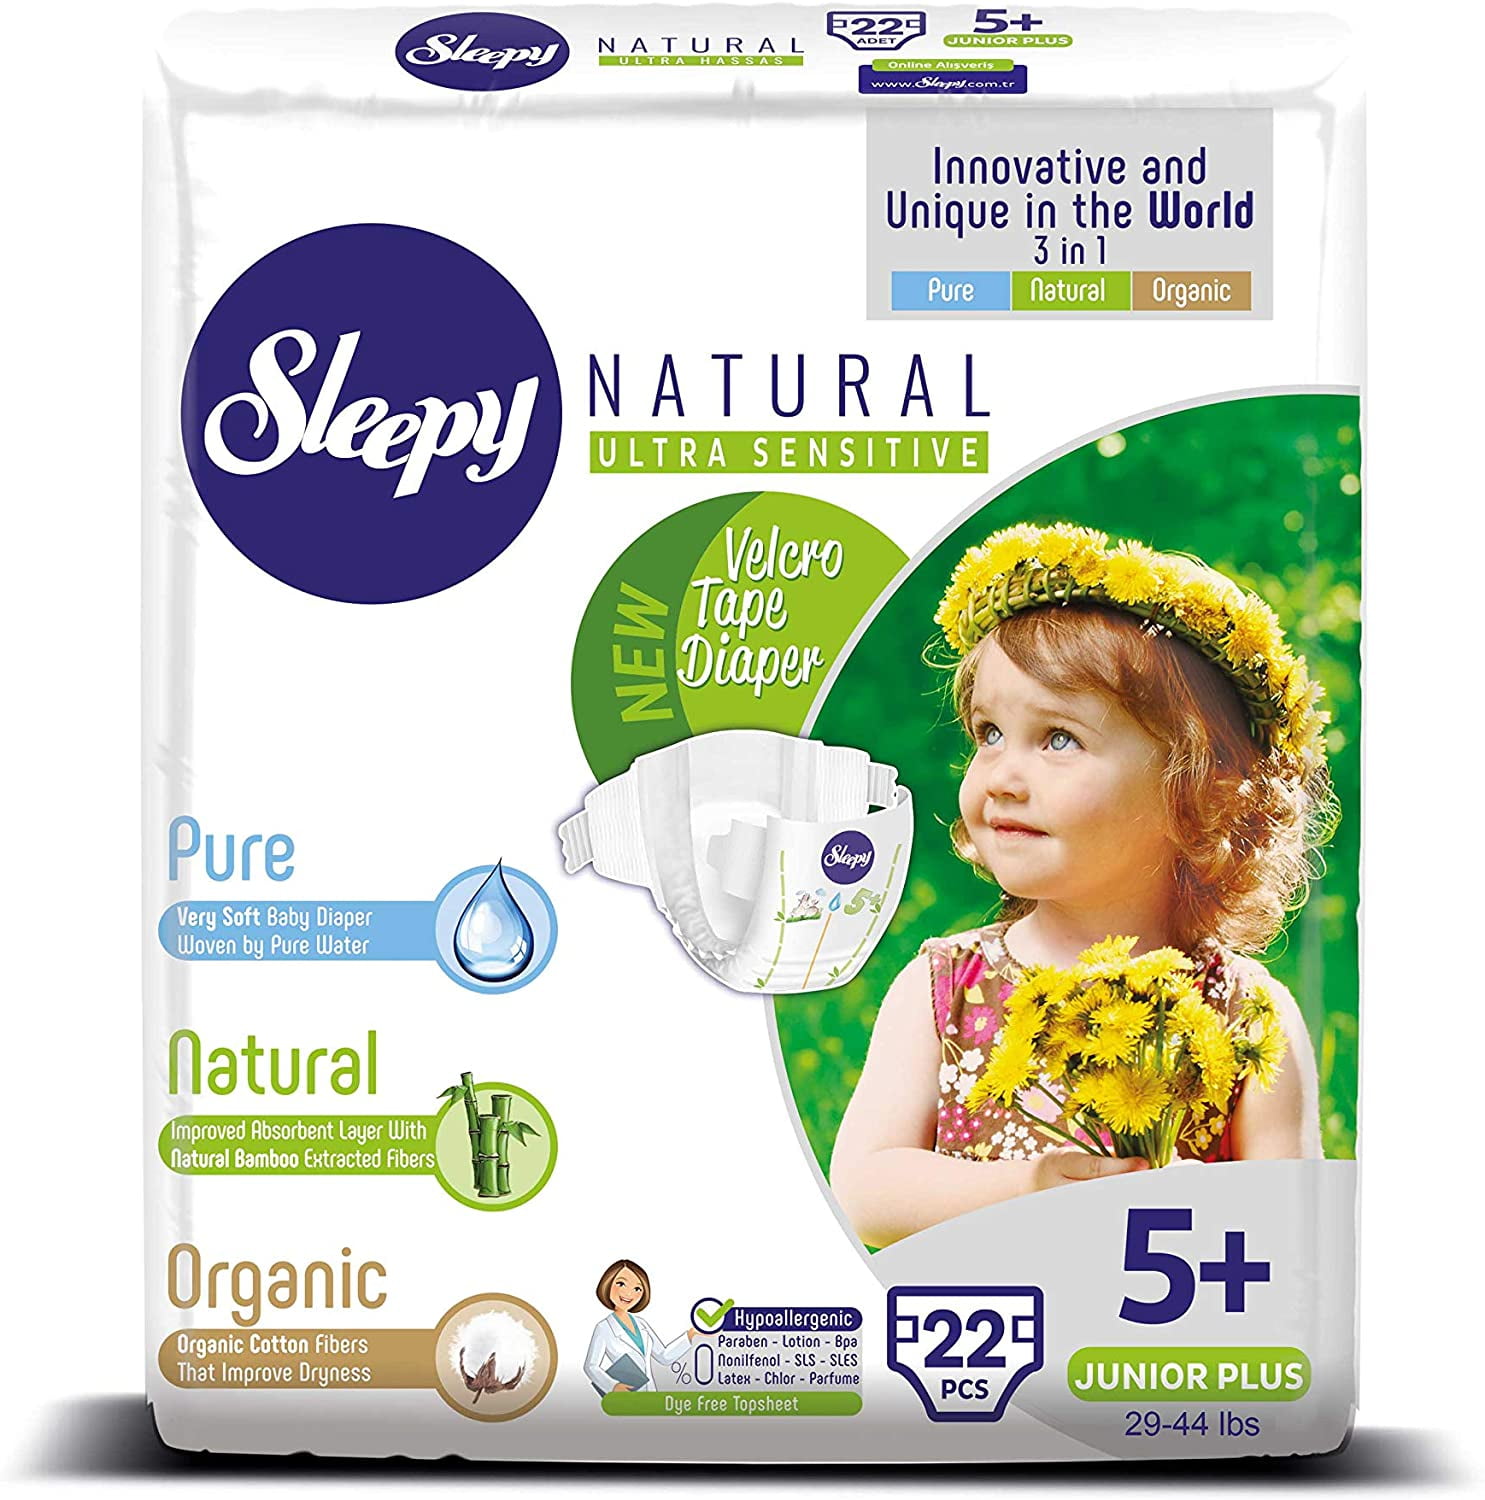 Ecological disposable diapers Love & Green Size 5 T5 BABY 12-25kg